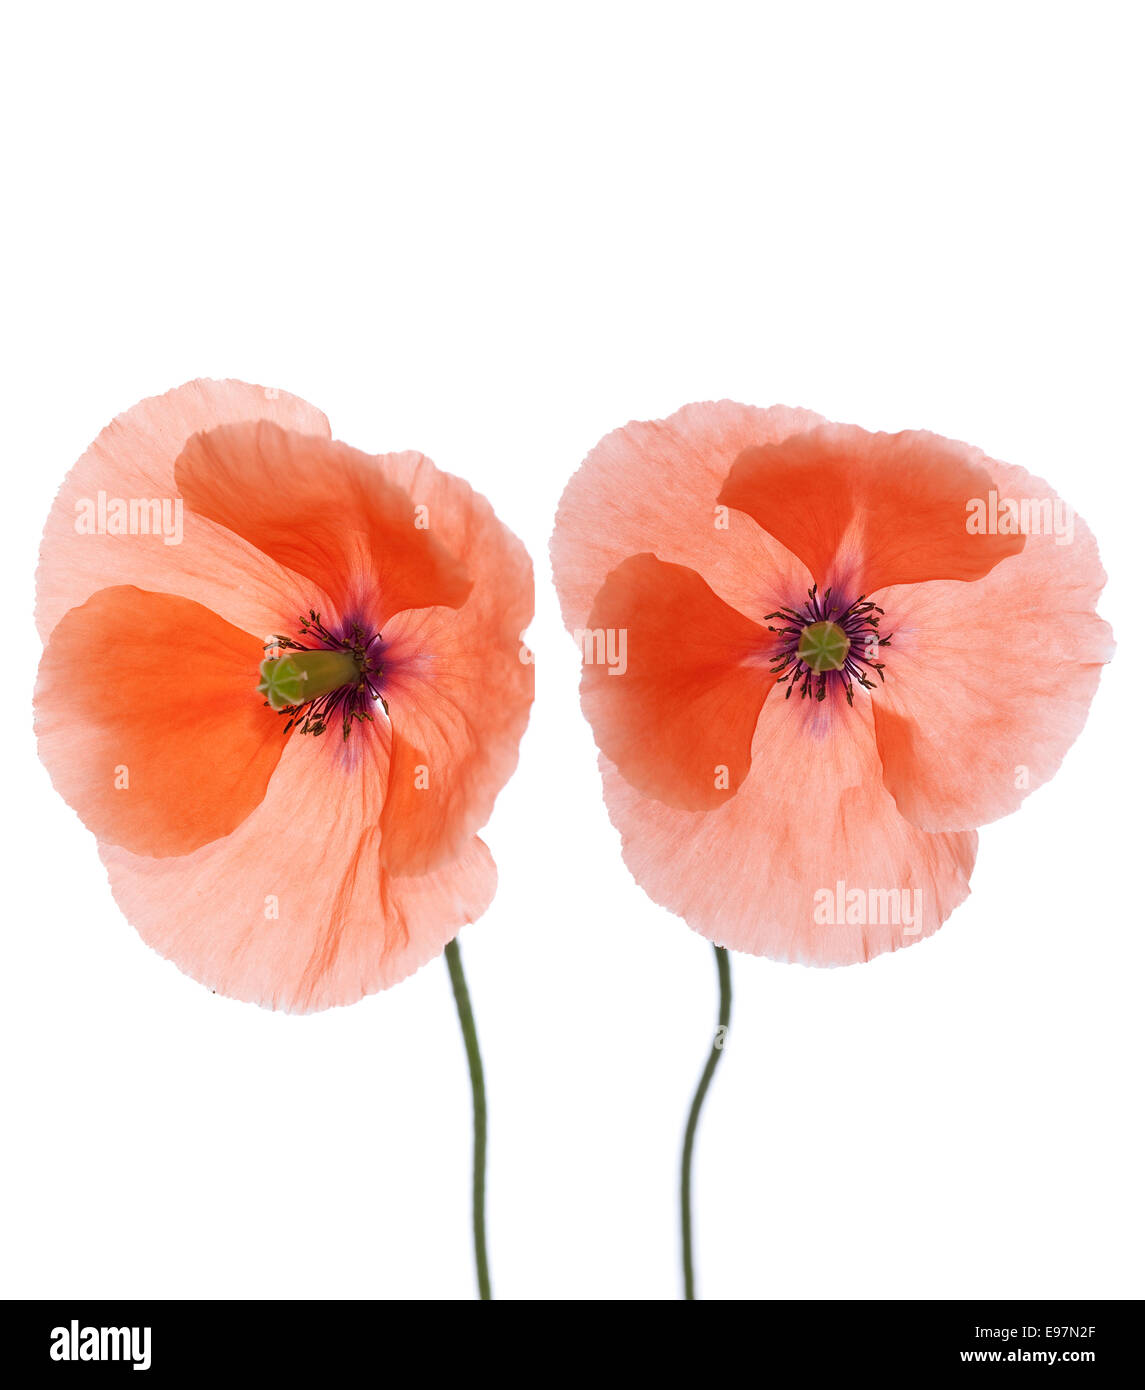 red of poppy (papaver) with stem on white background Stock Photo